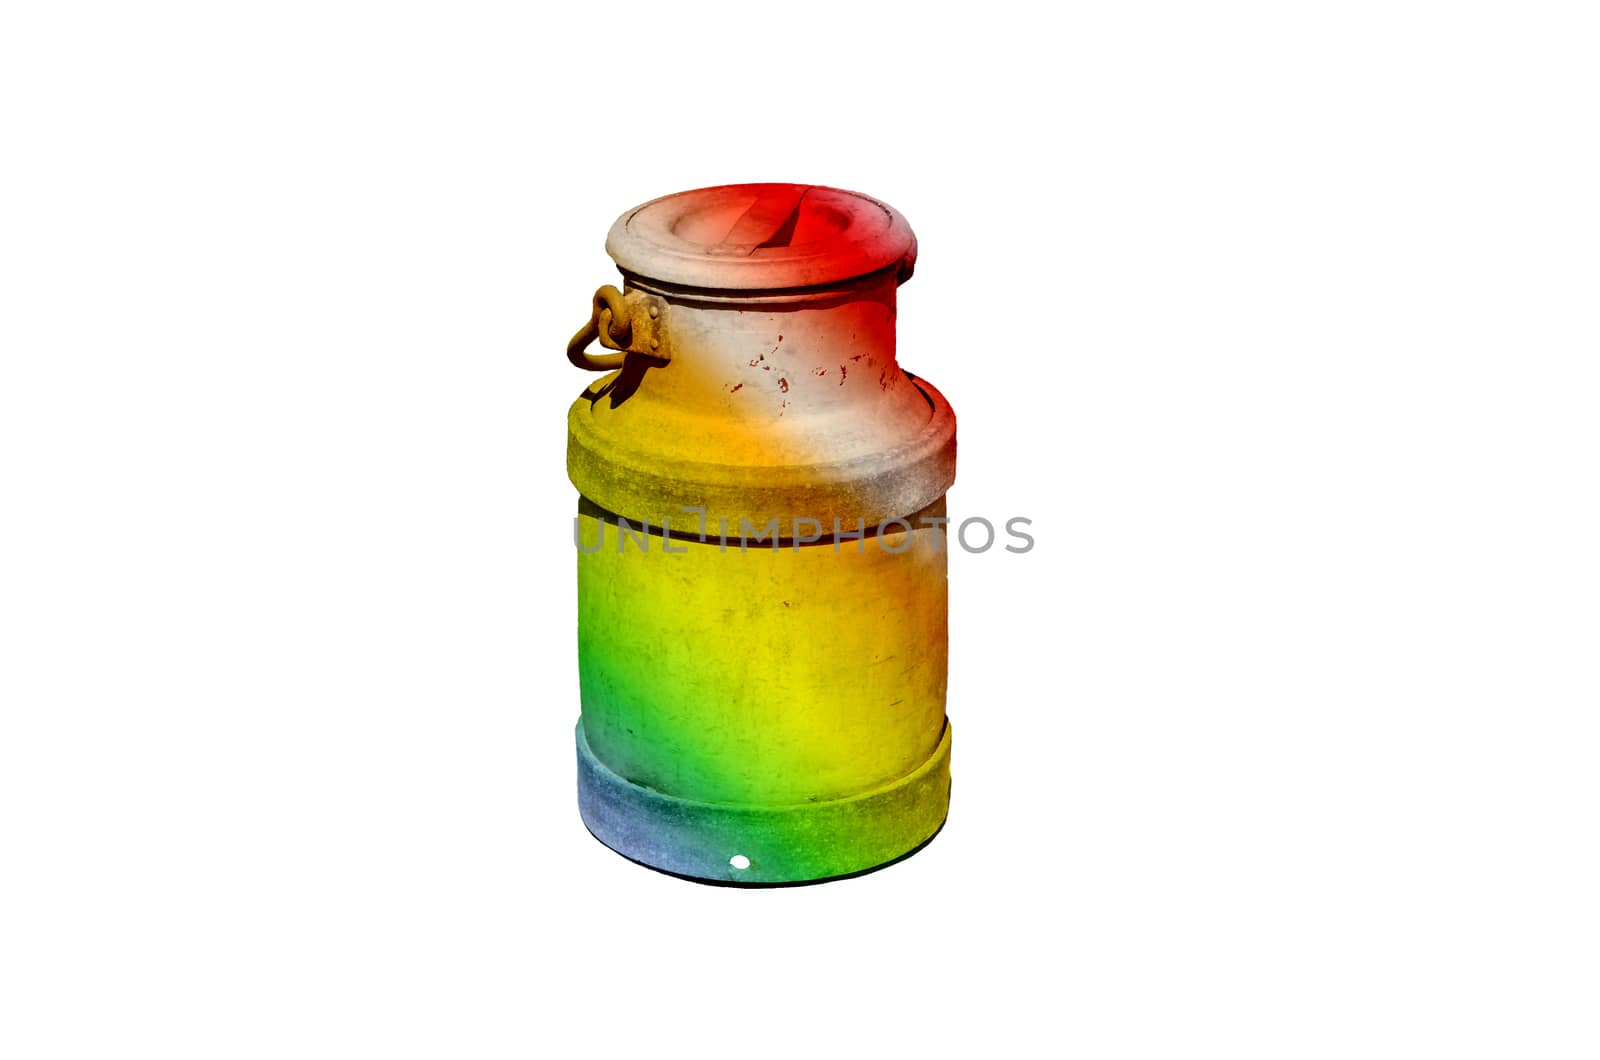 Old slightly weathered milk jug with rainbow colors against a white background.
